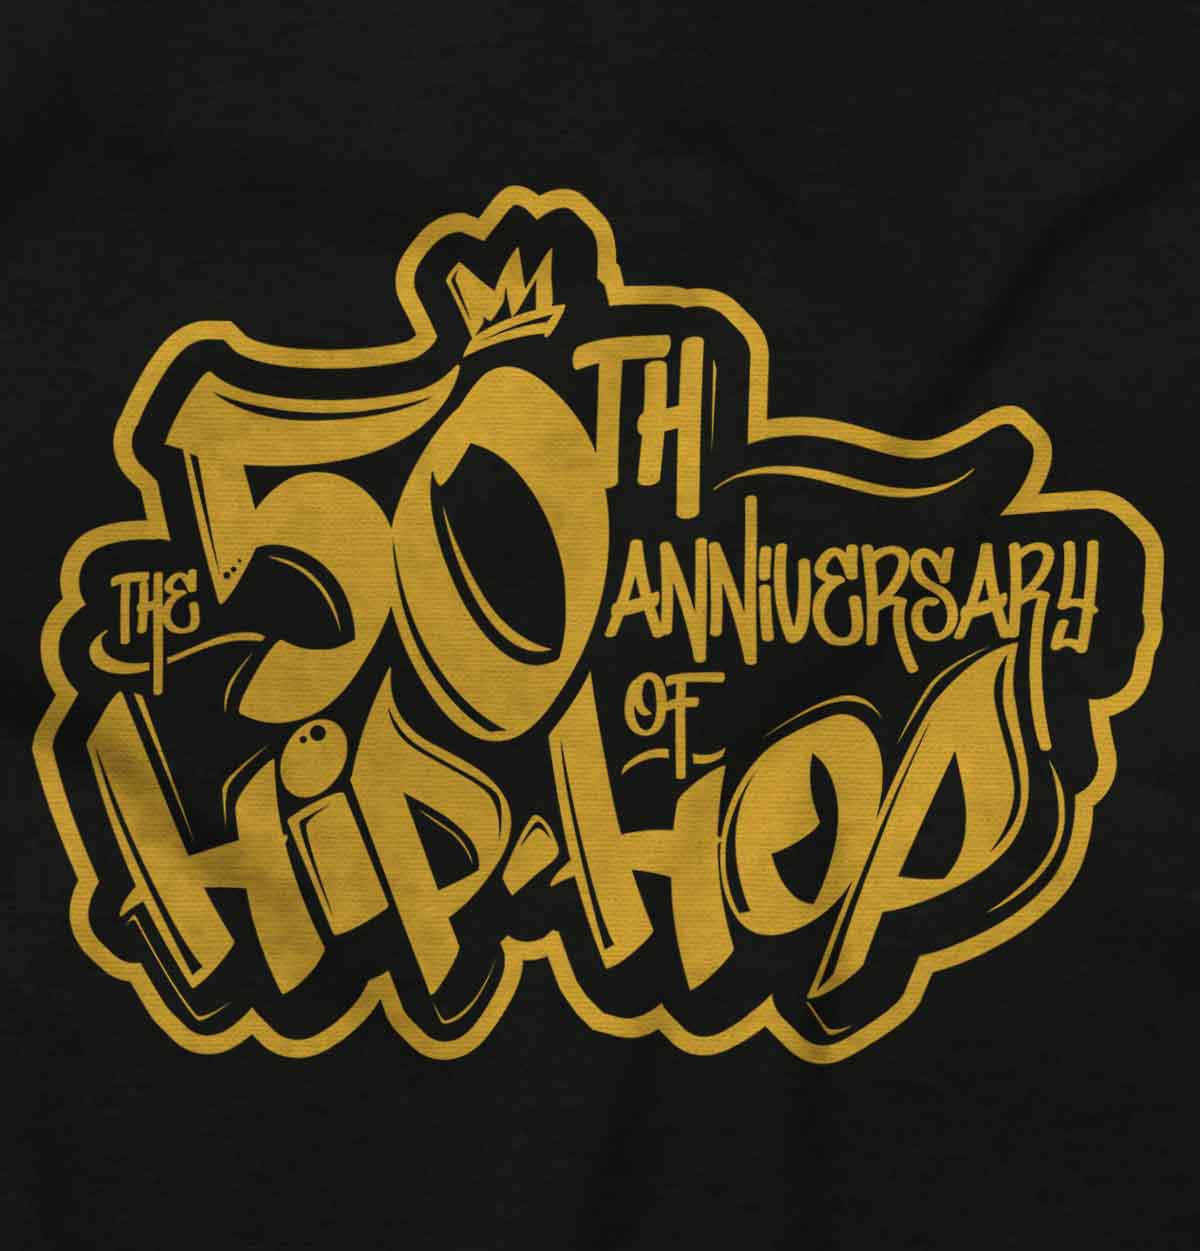 This image honors the birth of hip hop in New York City and its impact on art and culture.